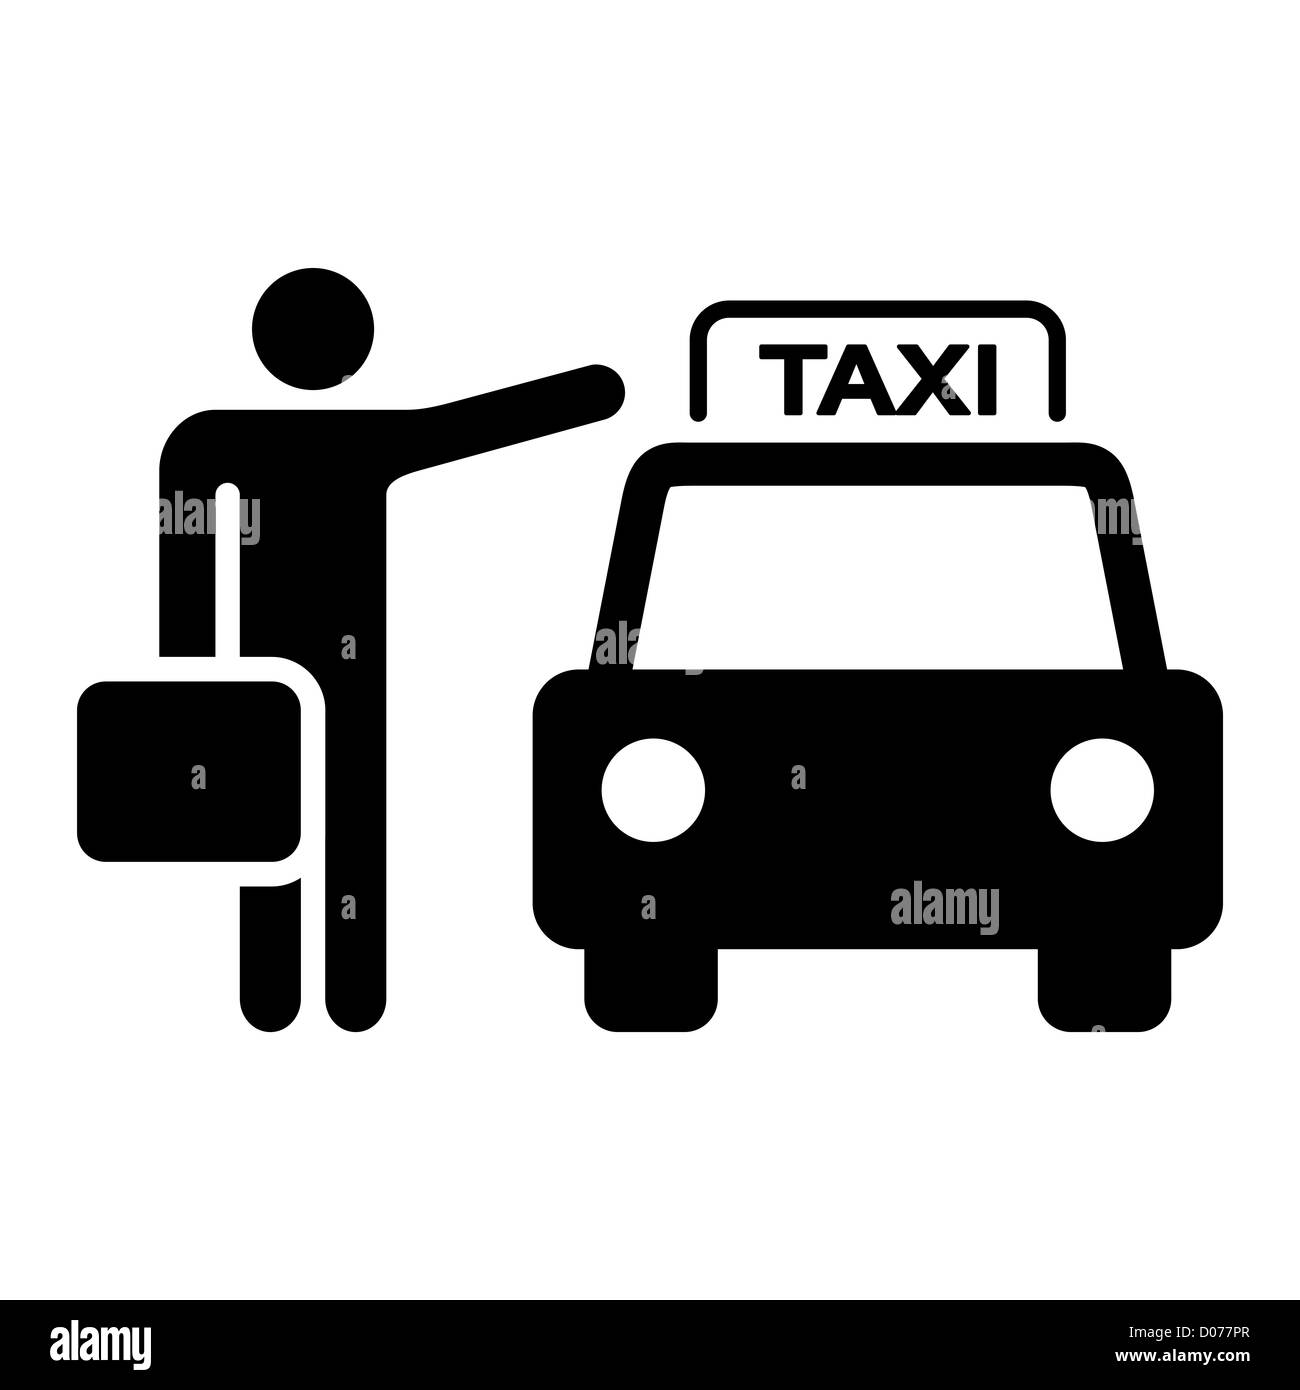 Hail a cab Black and White Stock Photos & Images - Alamy